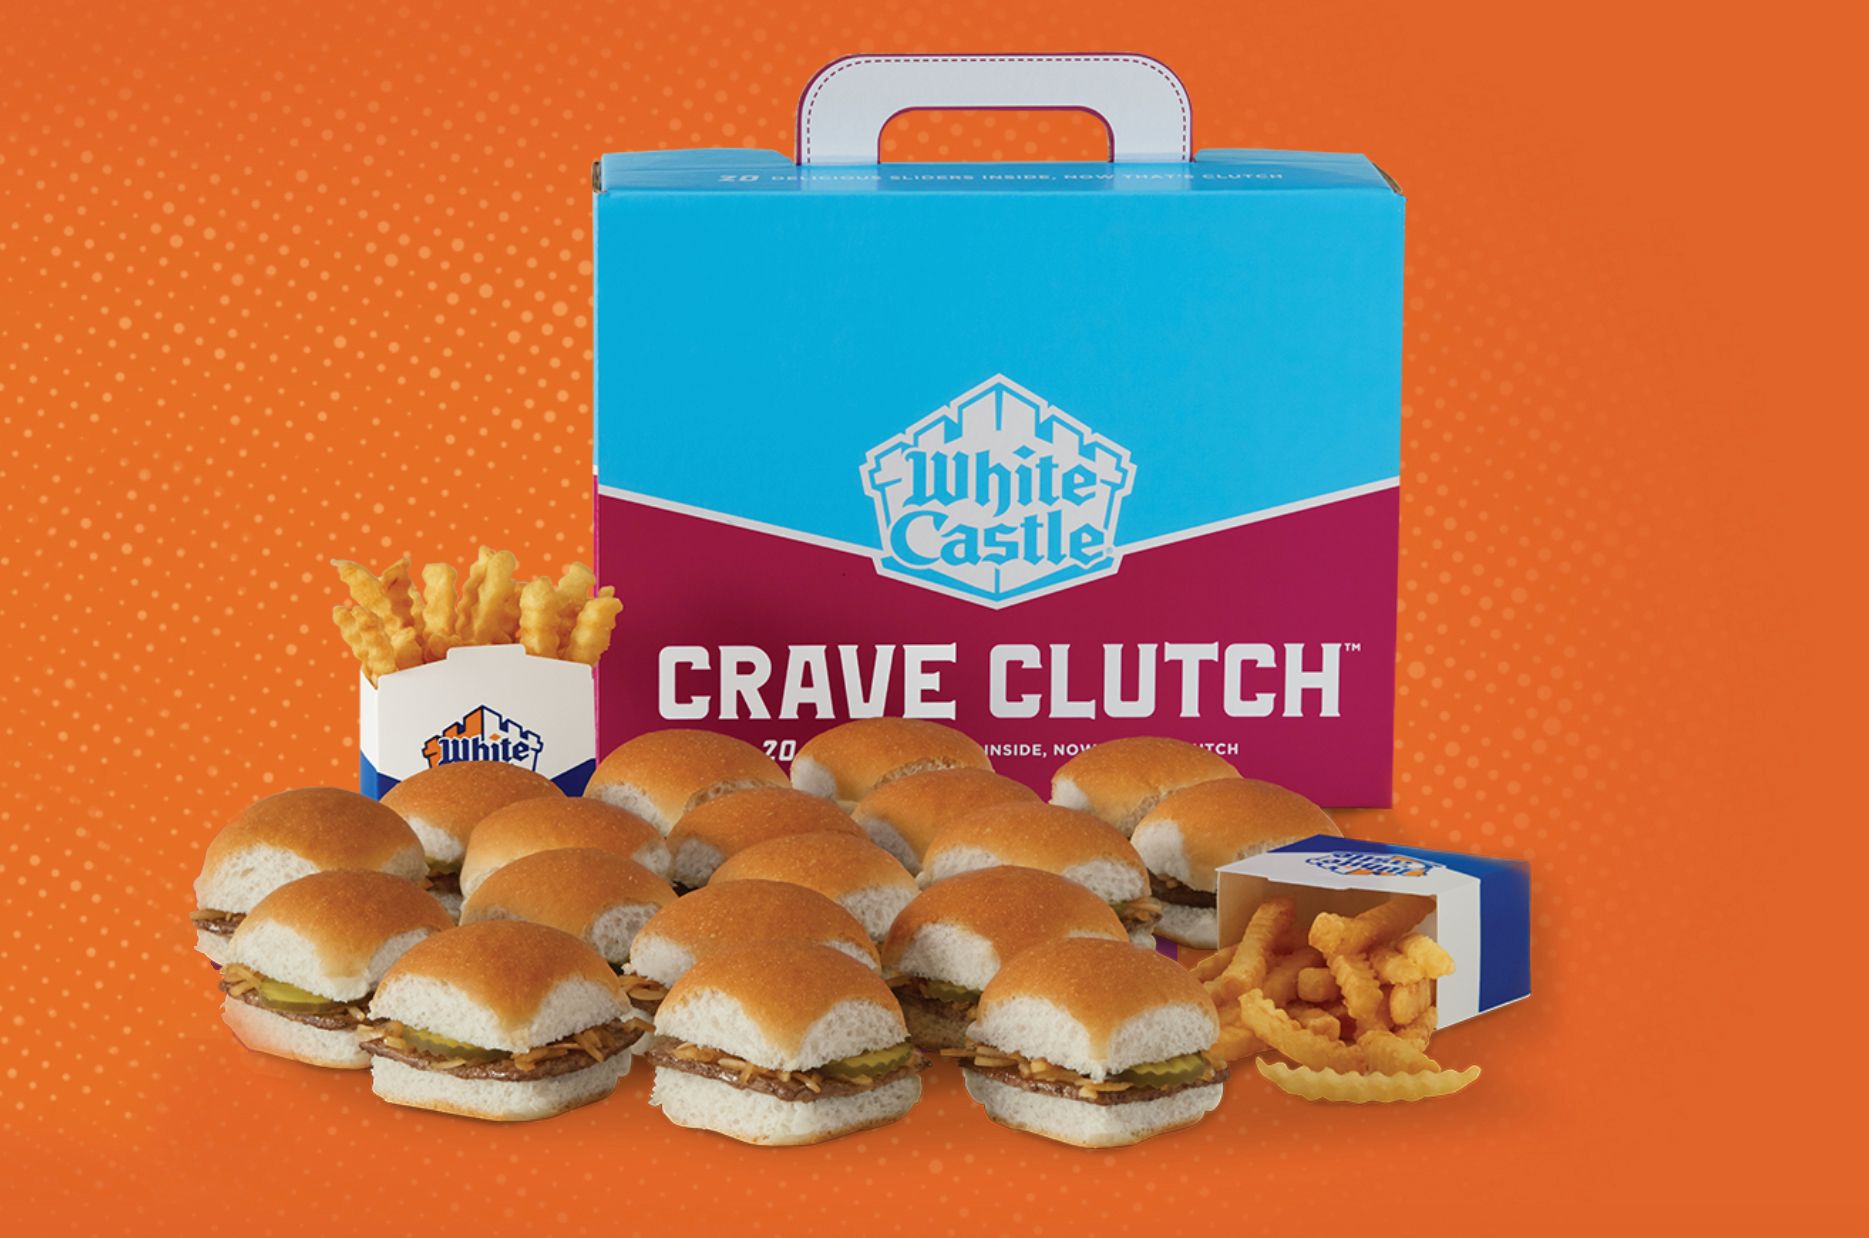 Get the New Crave Clutch with a Feast of Sliders and Fries at White Castle